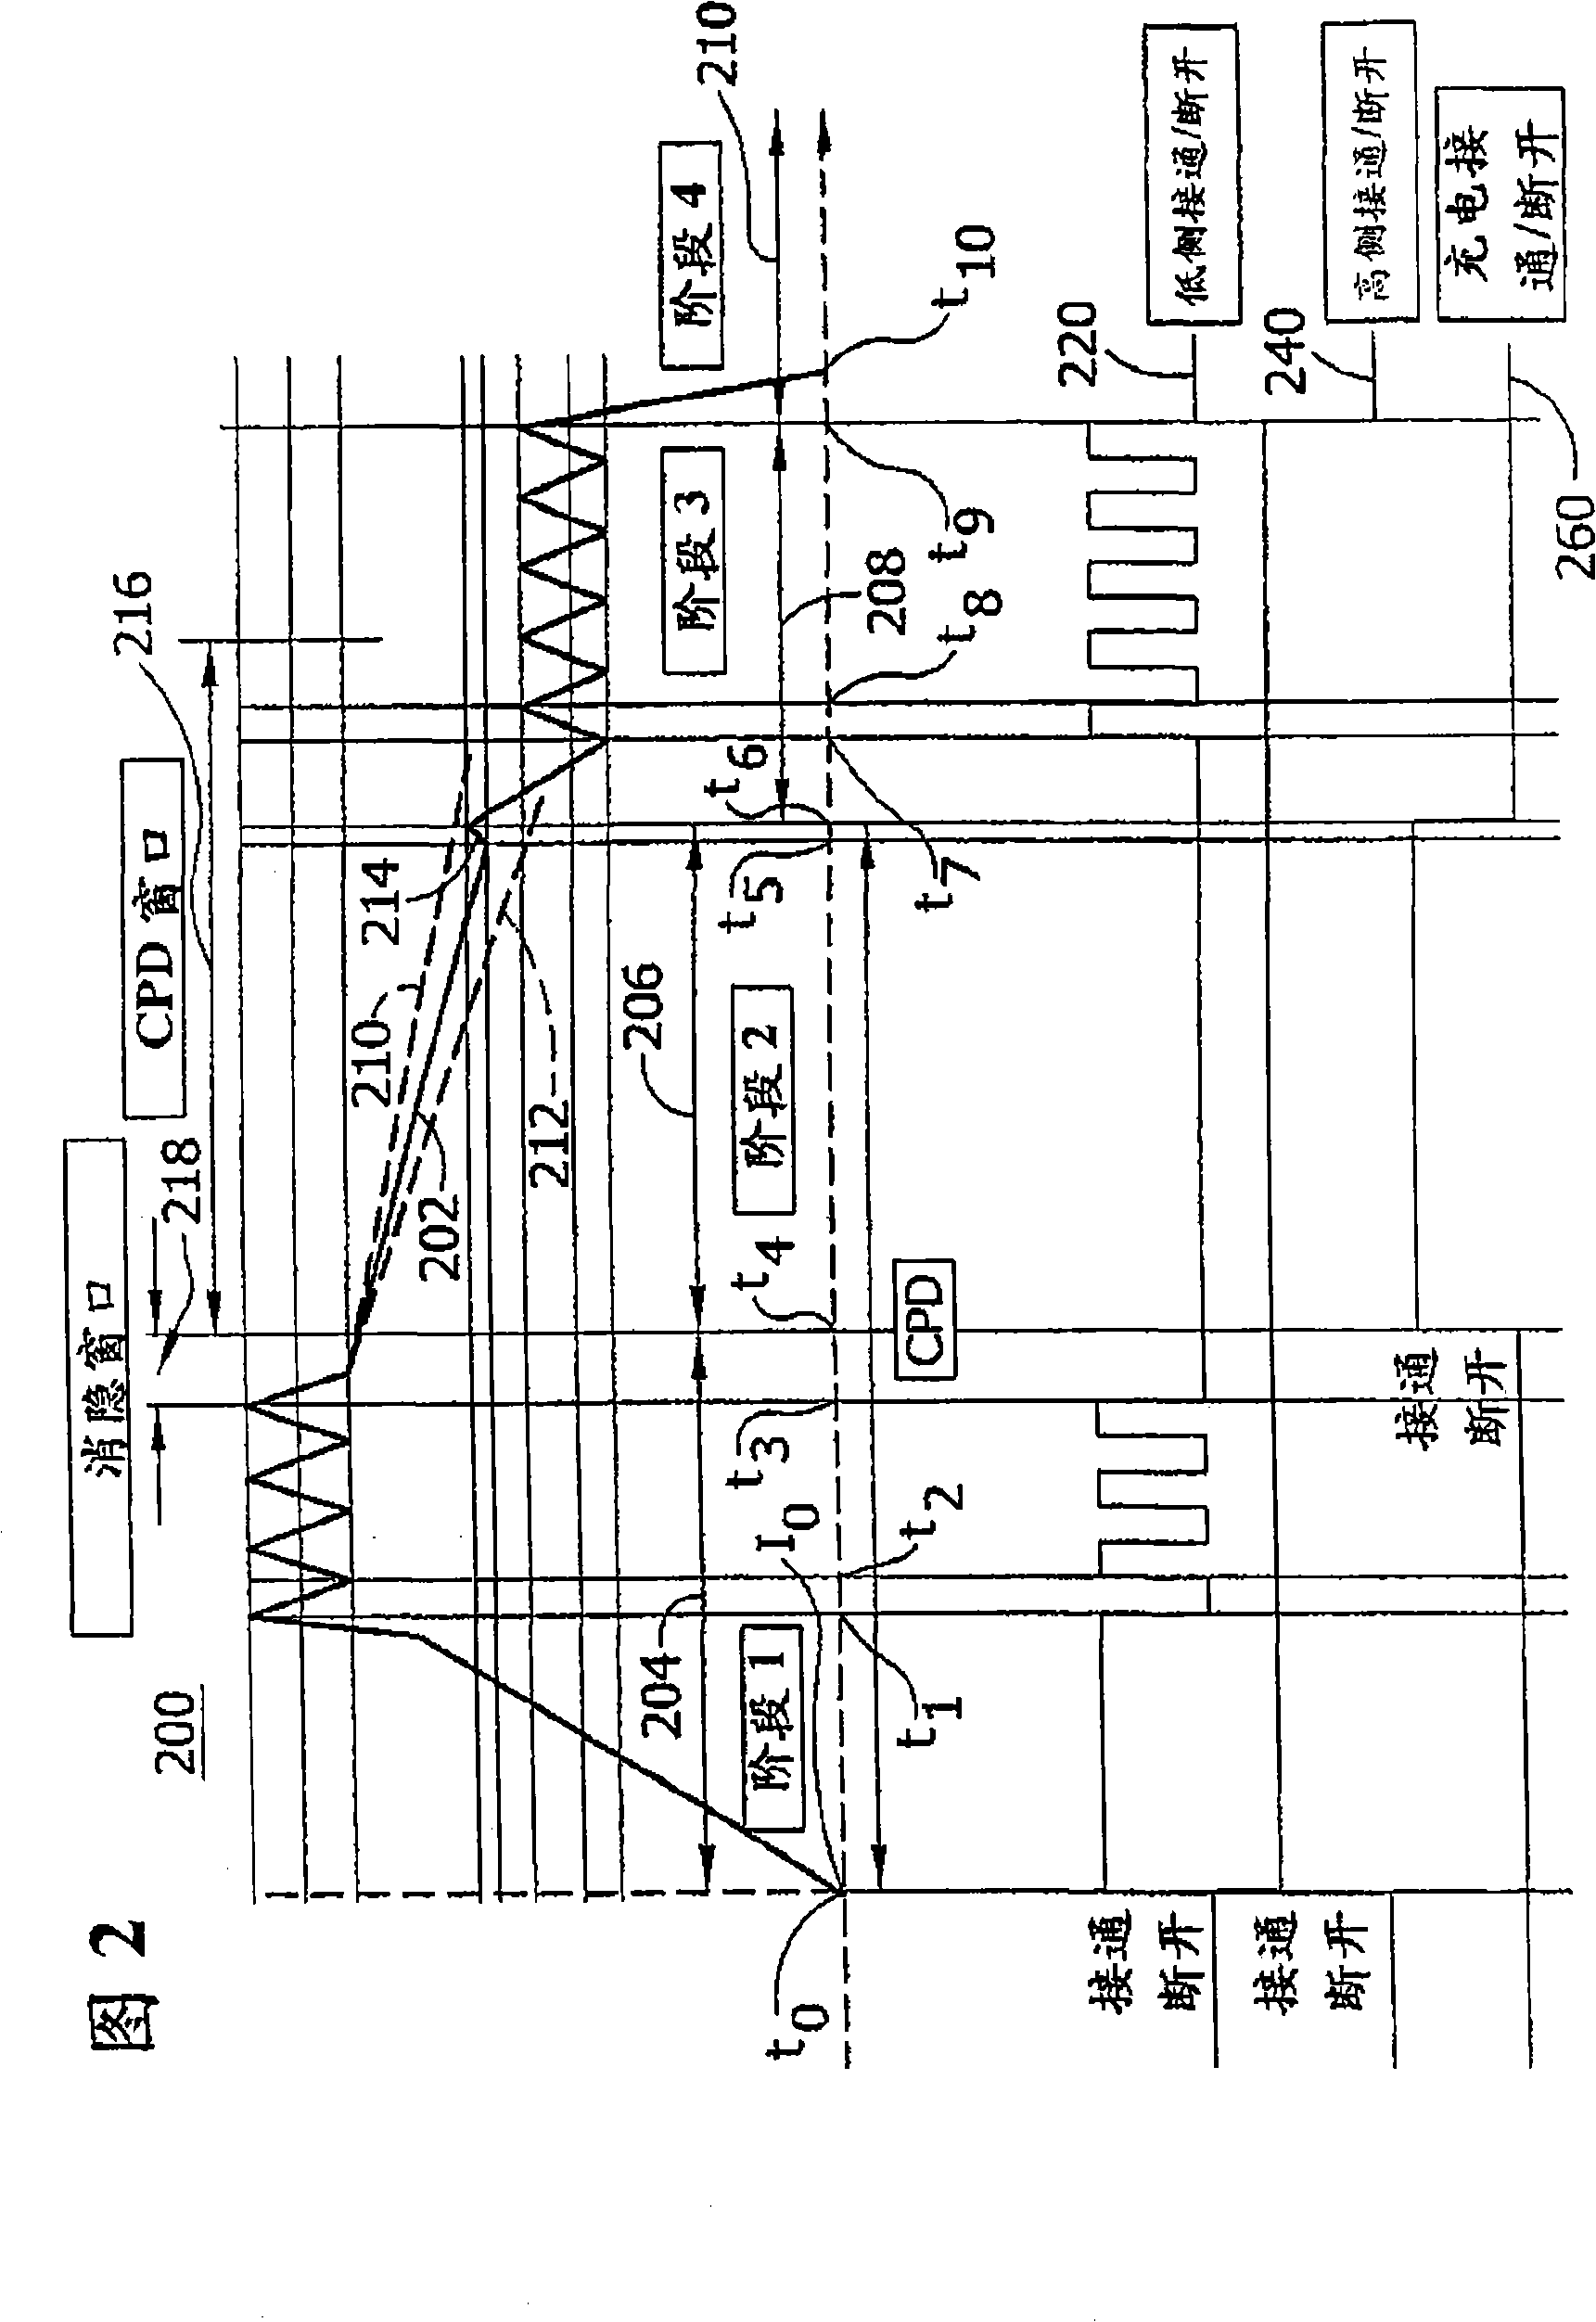 Apparatus and method for accurate detection of locomotive fuel injection pump solenoid closure